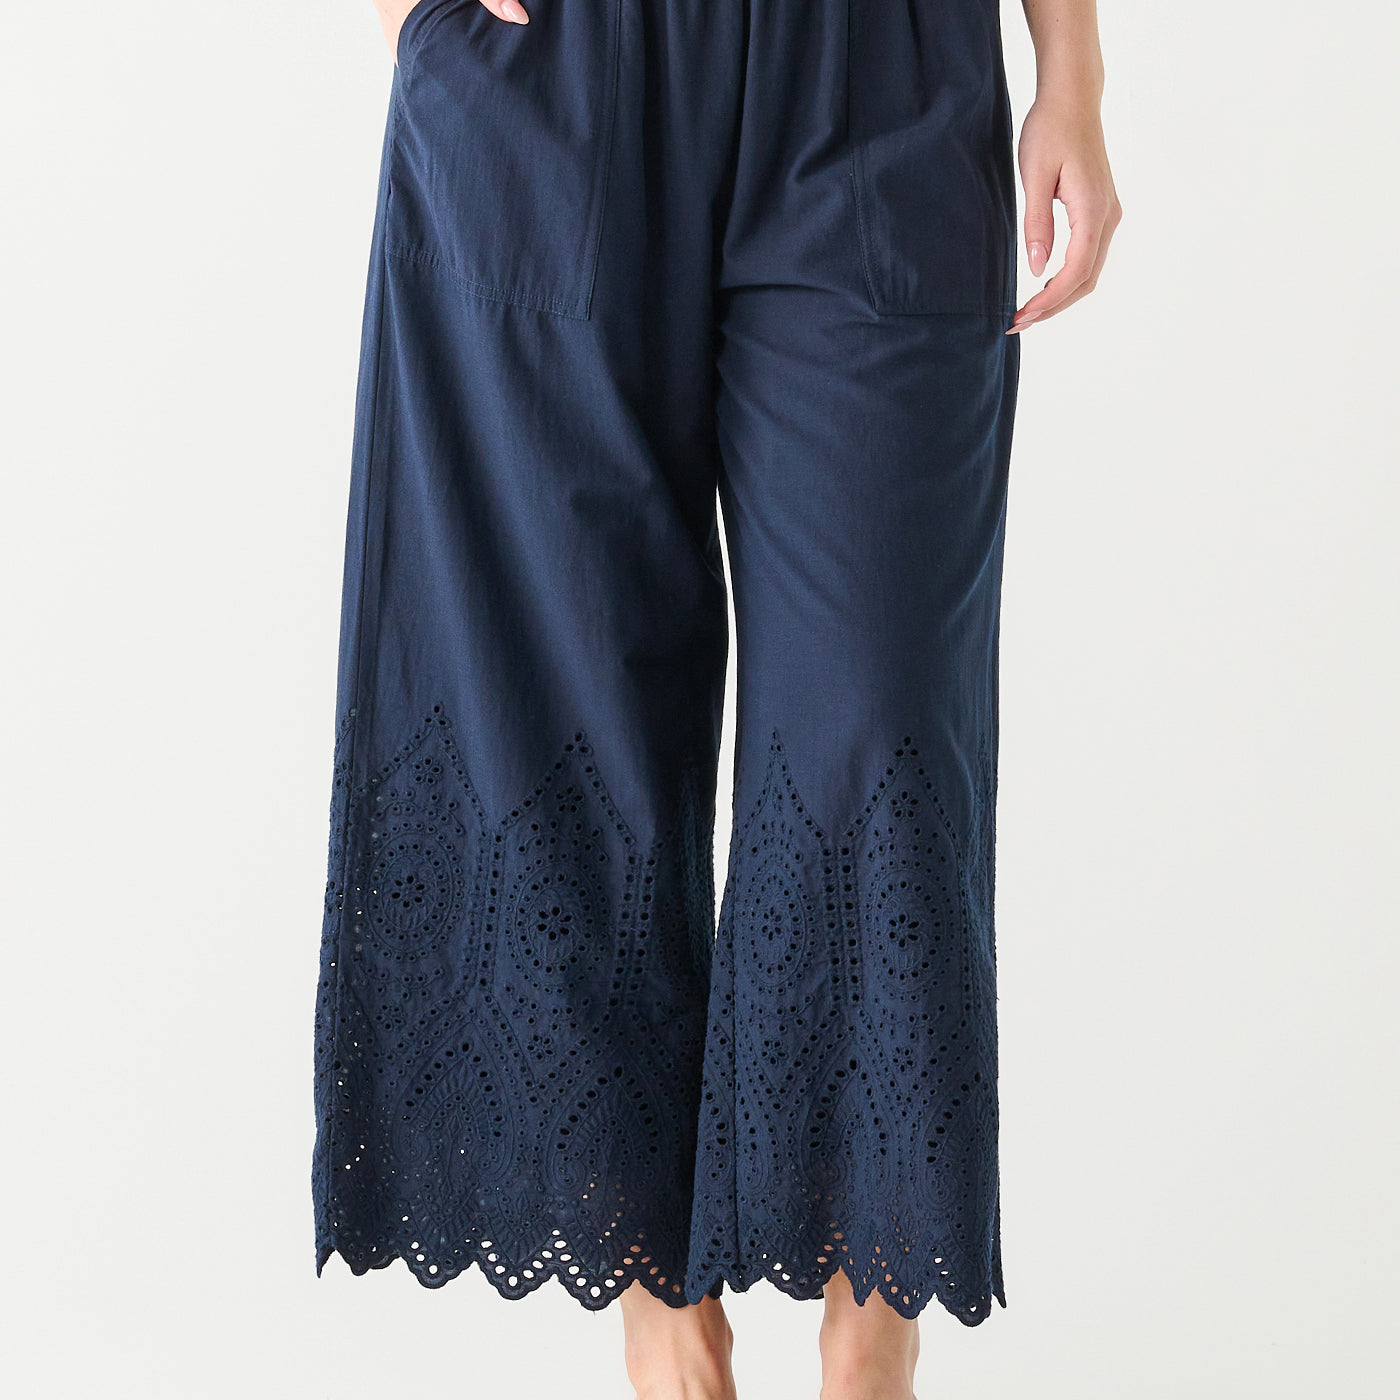 Eyelet Pull On Pants-Pants-Vixen Collection, Day Spa and Women's Boutique Located in Seattle, Washington